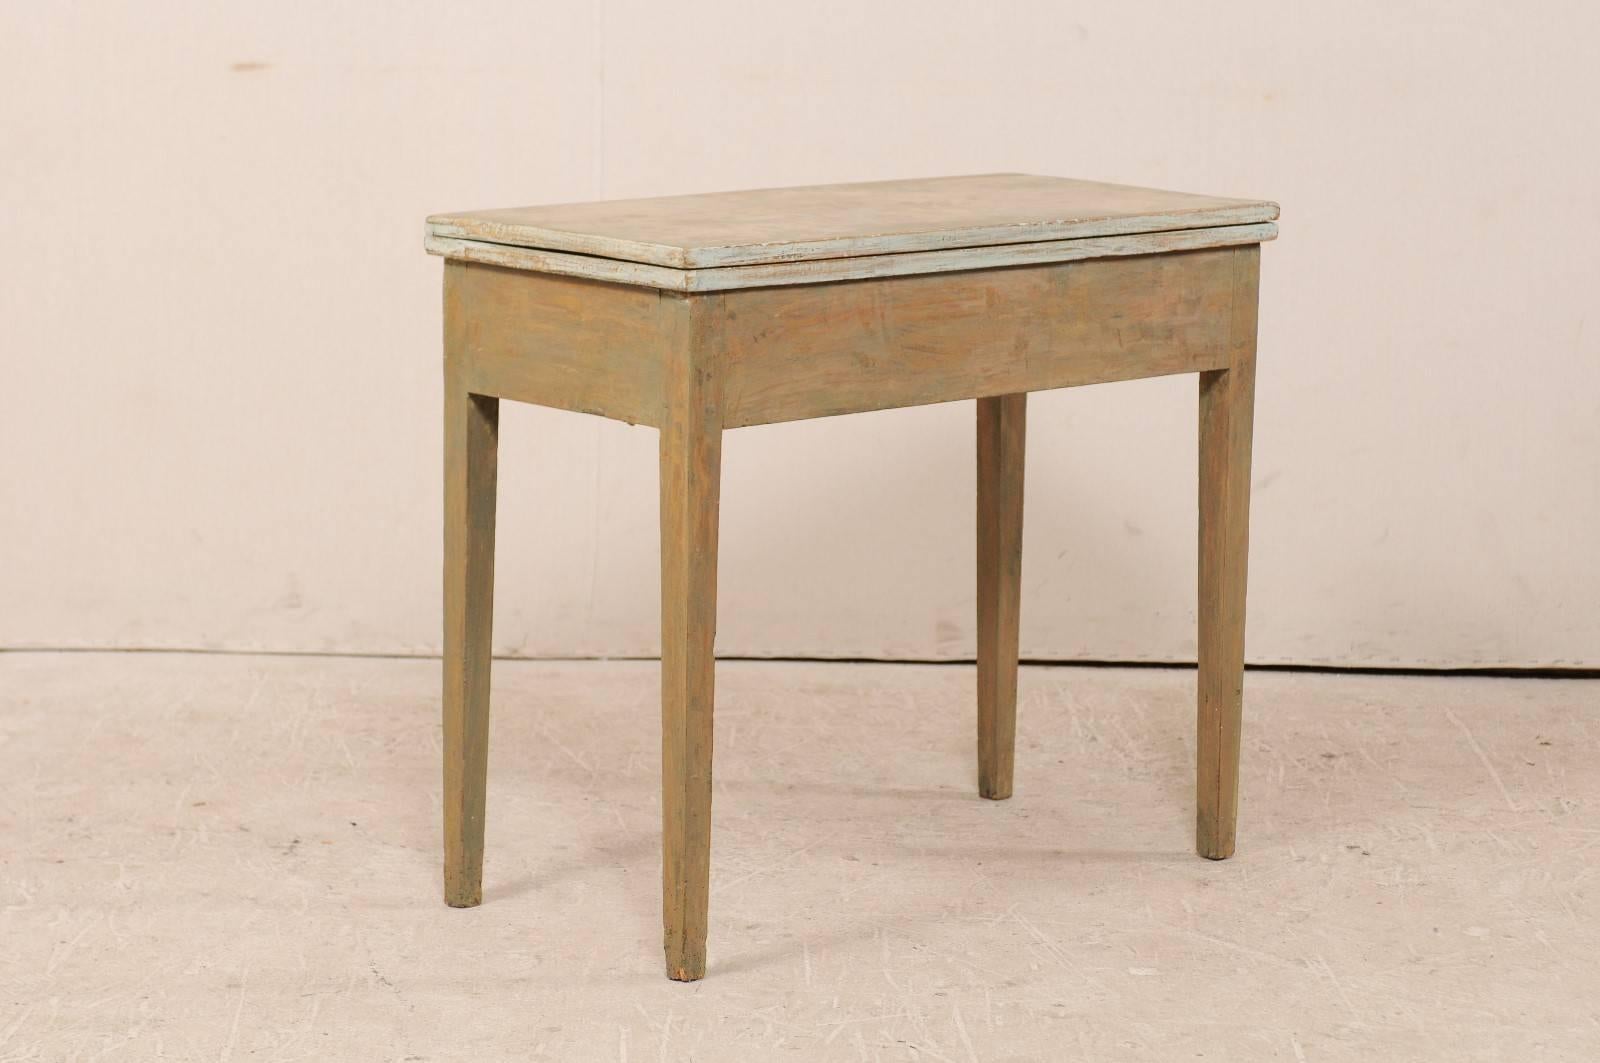 A Swedish 19th century painted wood game, side or small console table. This Swedish table features nice clean lines and a top, that can be opened to double the surface space. This wonderful little table has hidden storage space for game pieces or